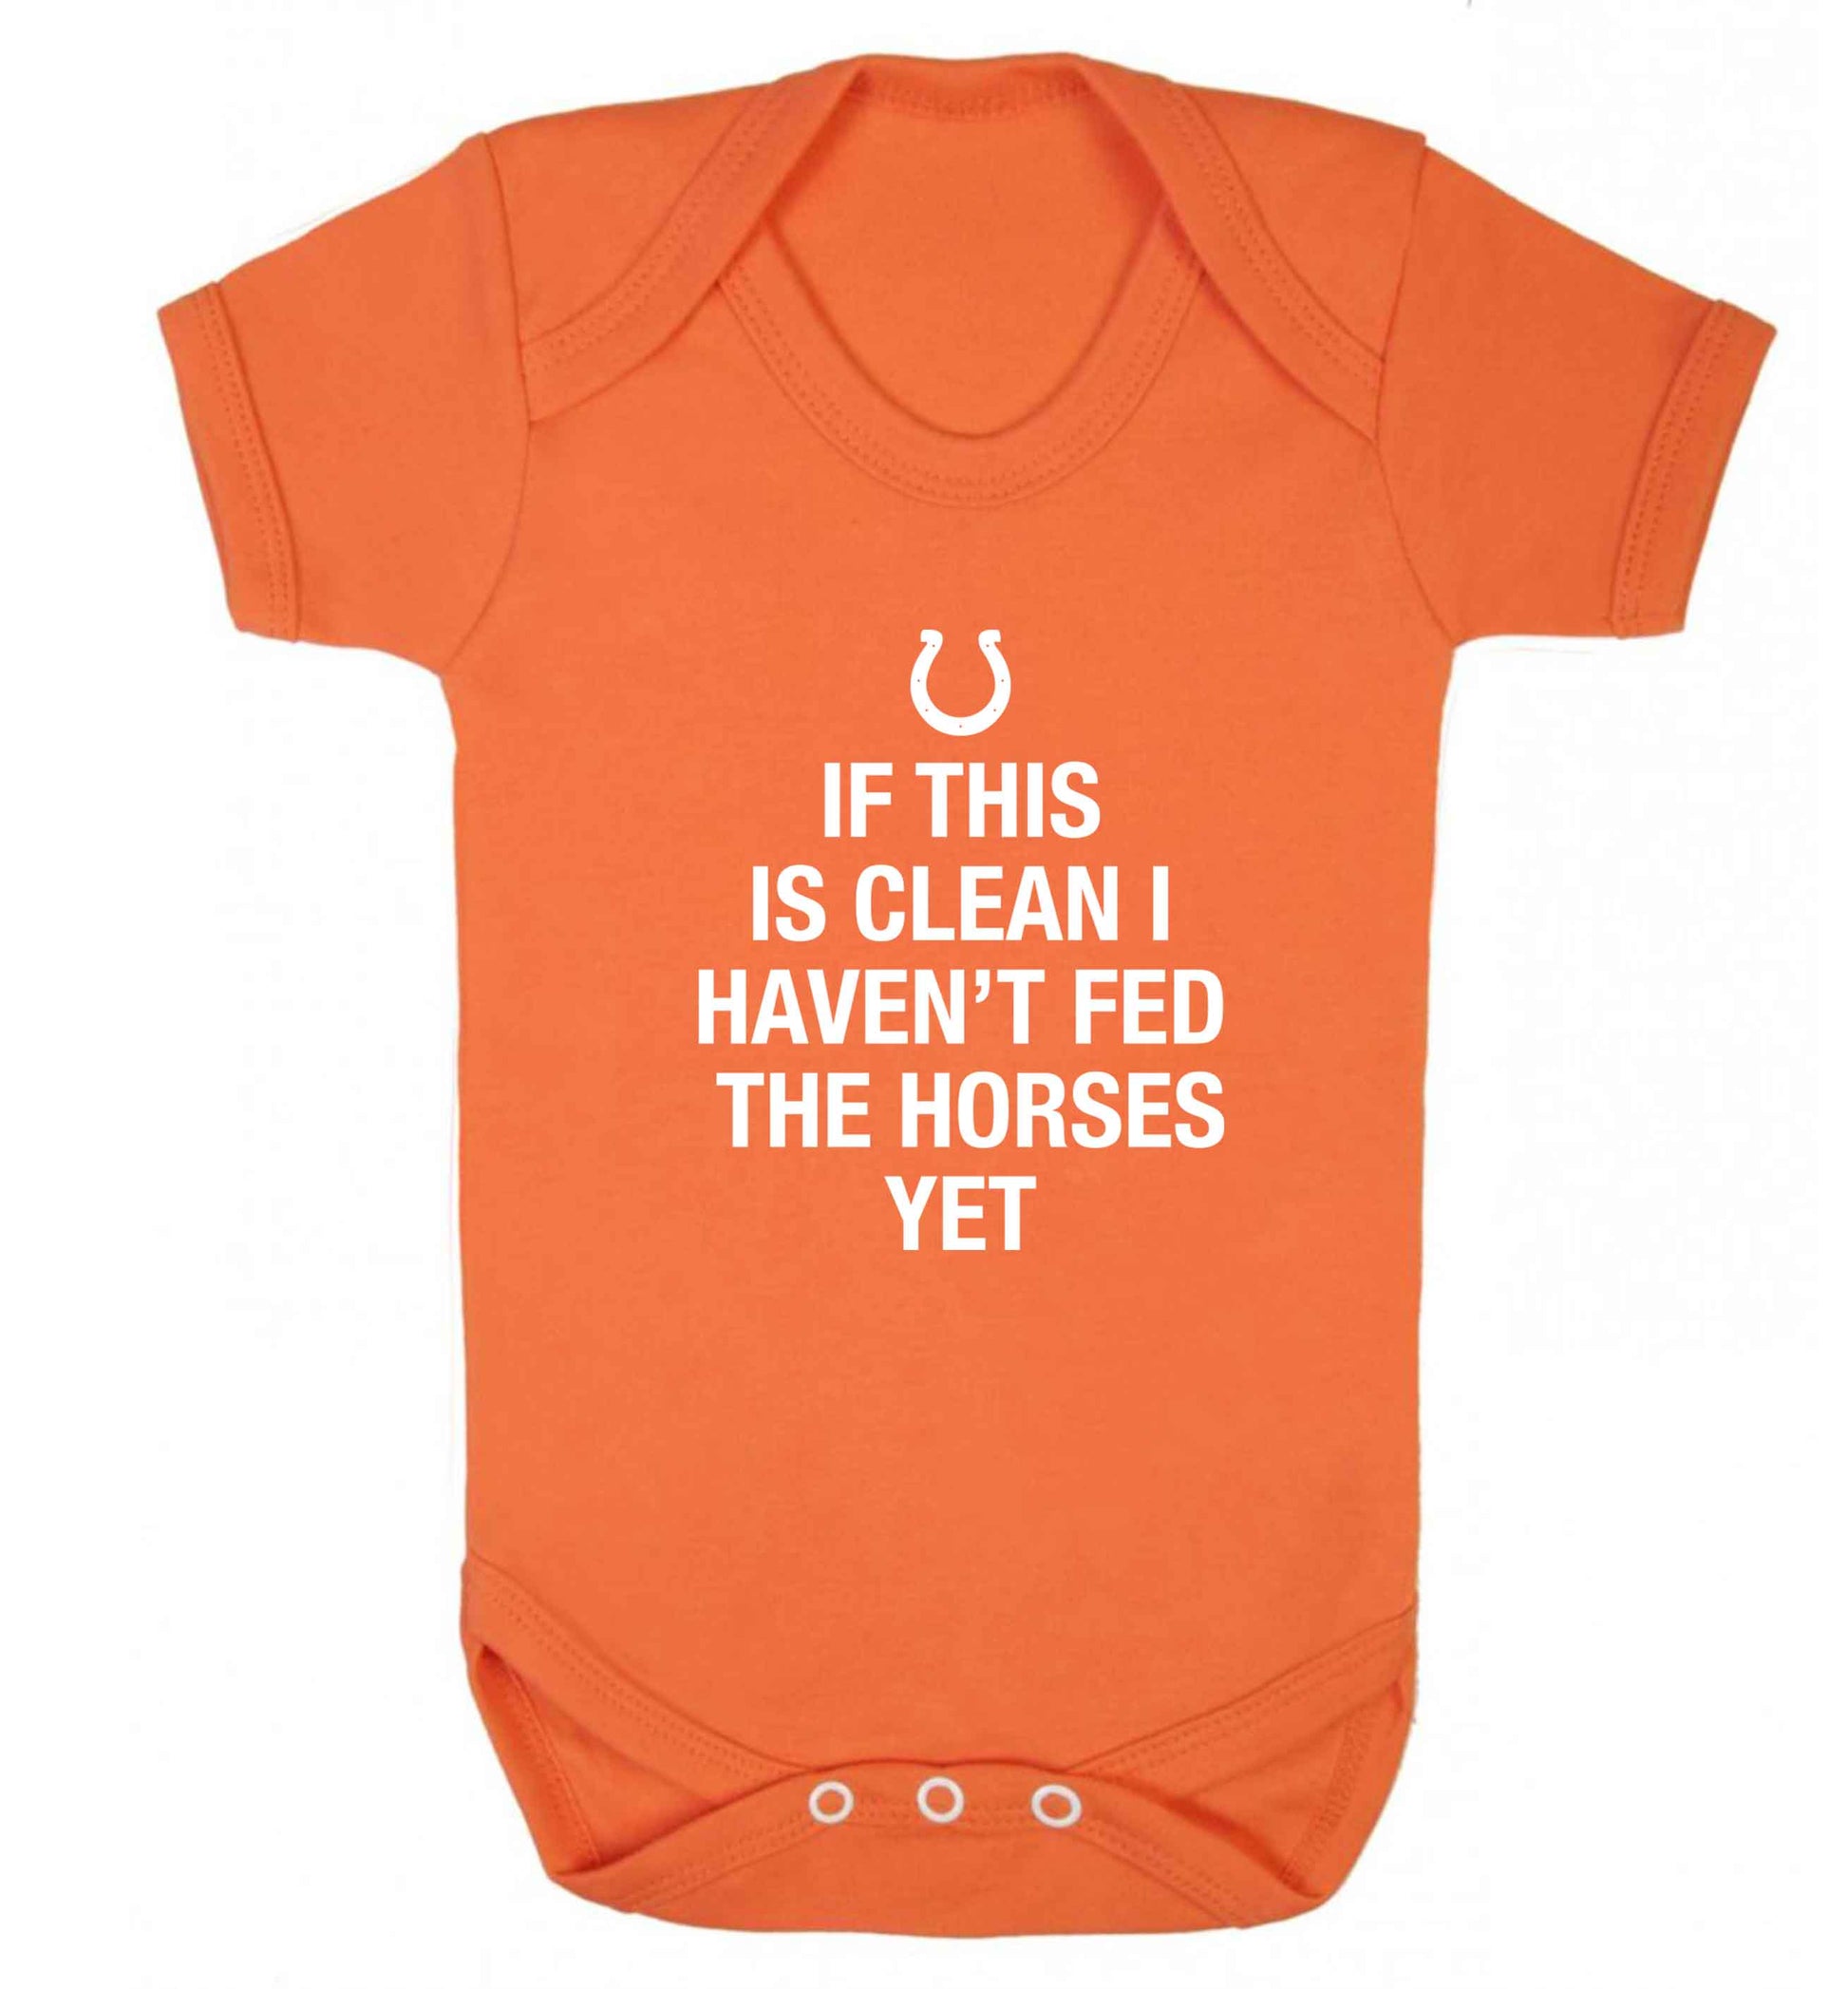 If this isn't clean I haven't fed the horses yet baby vest orange 18-24 months